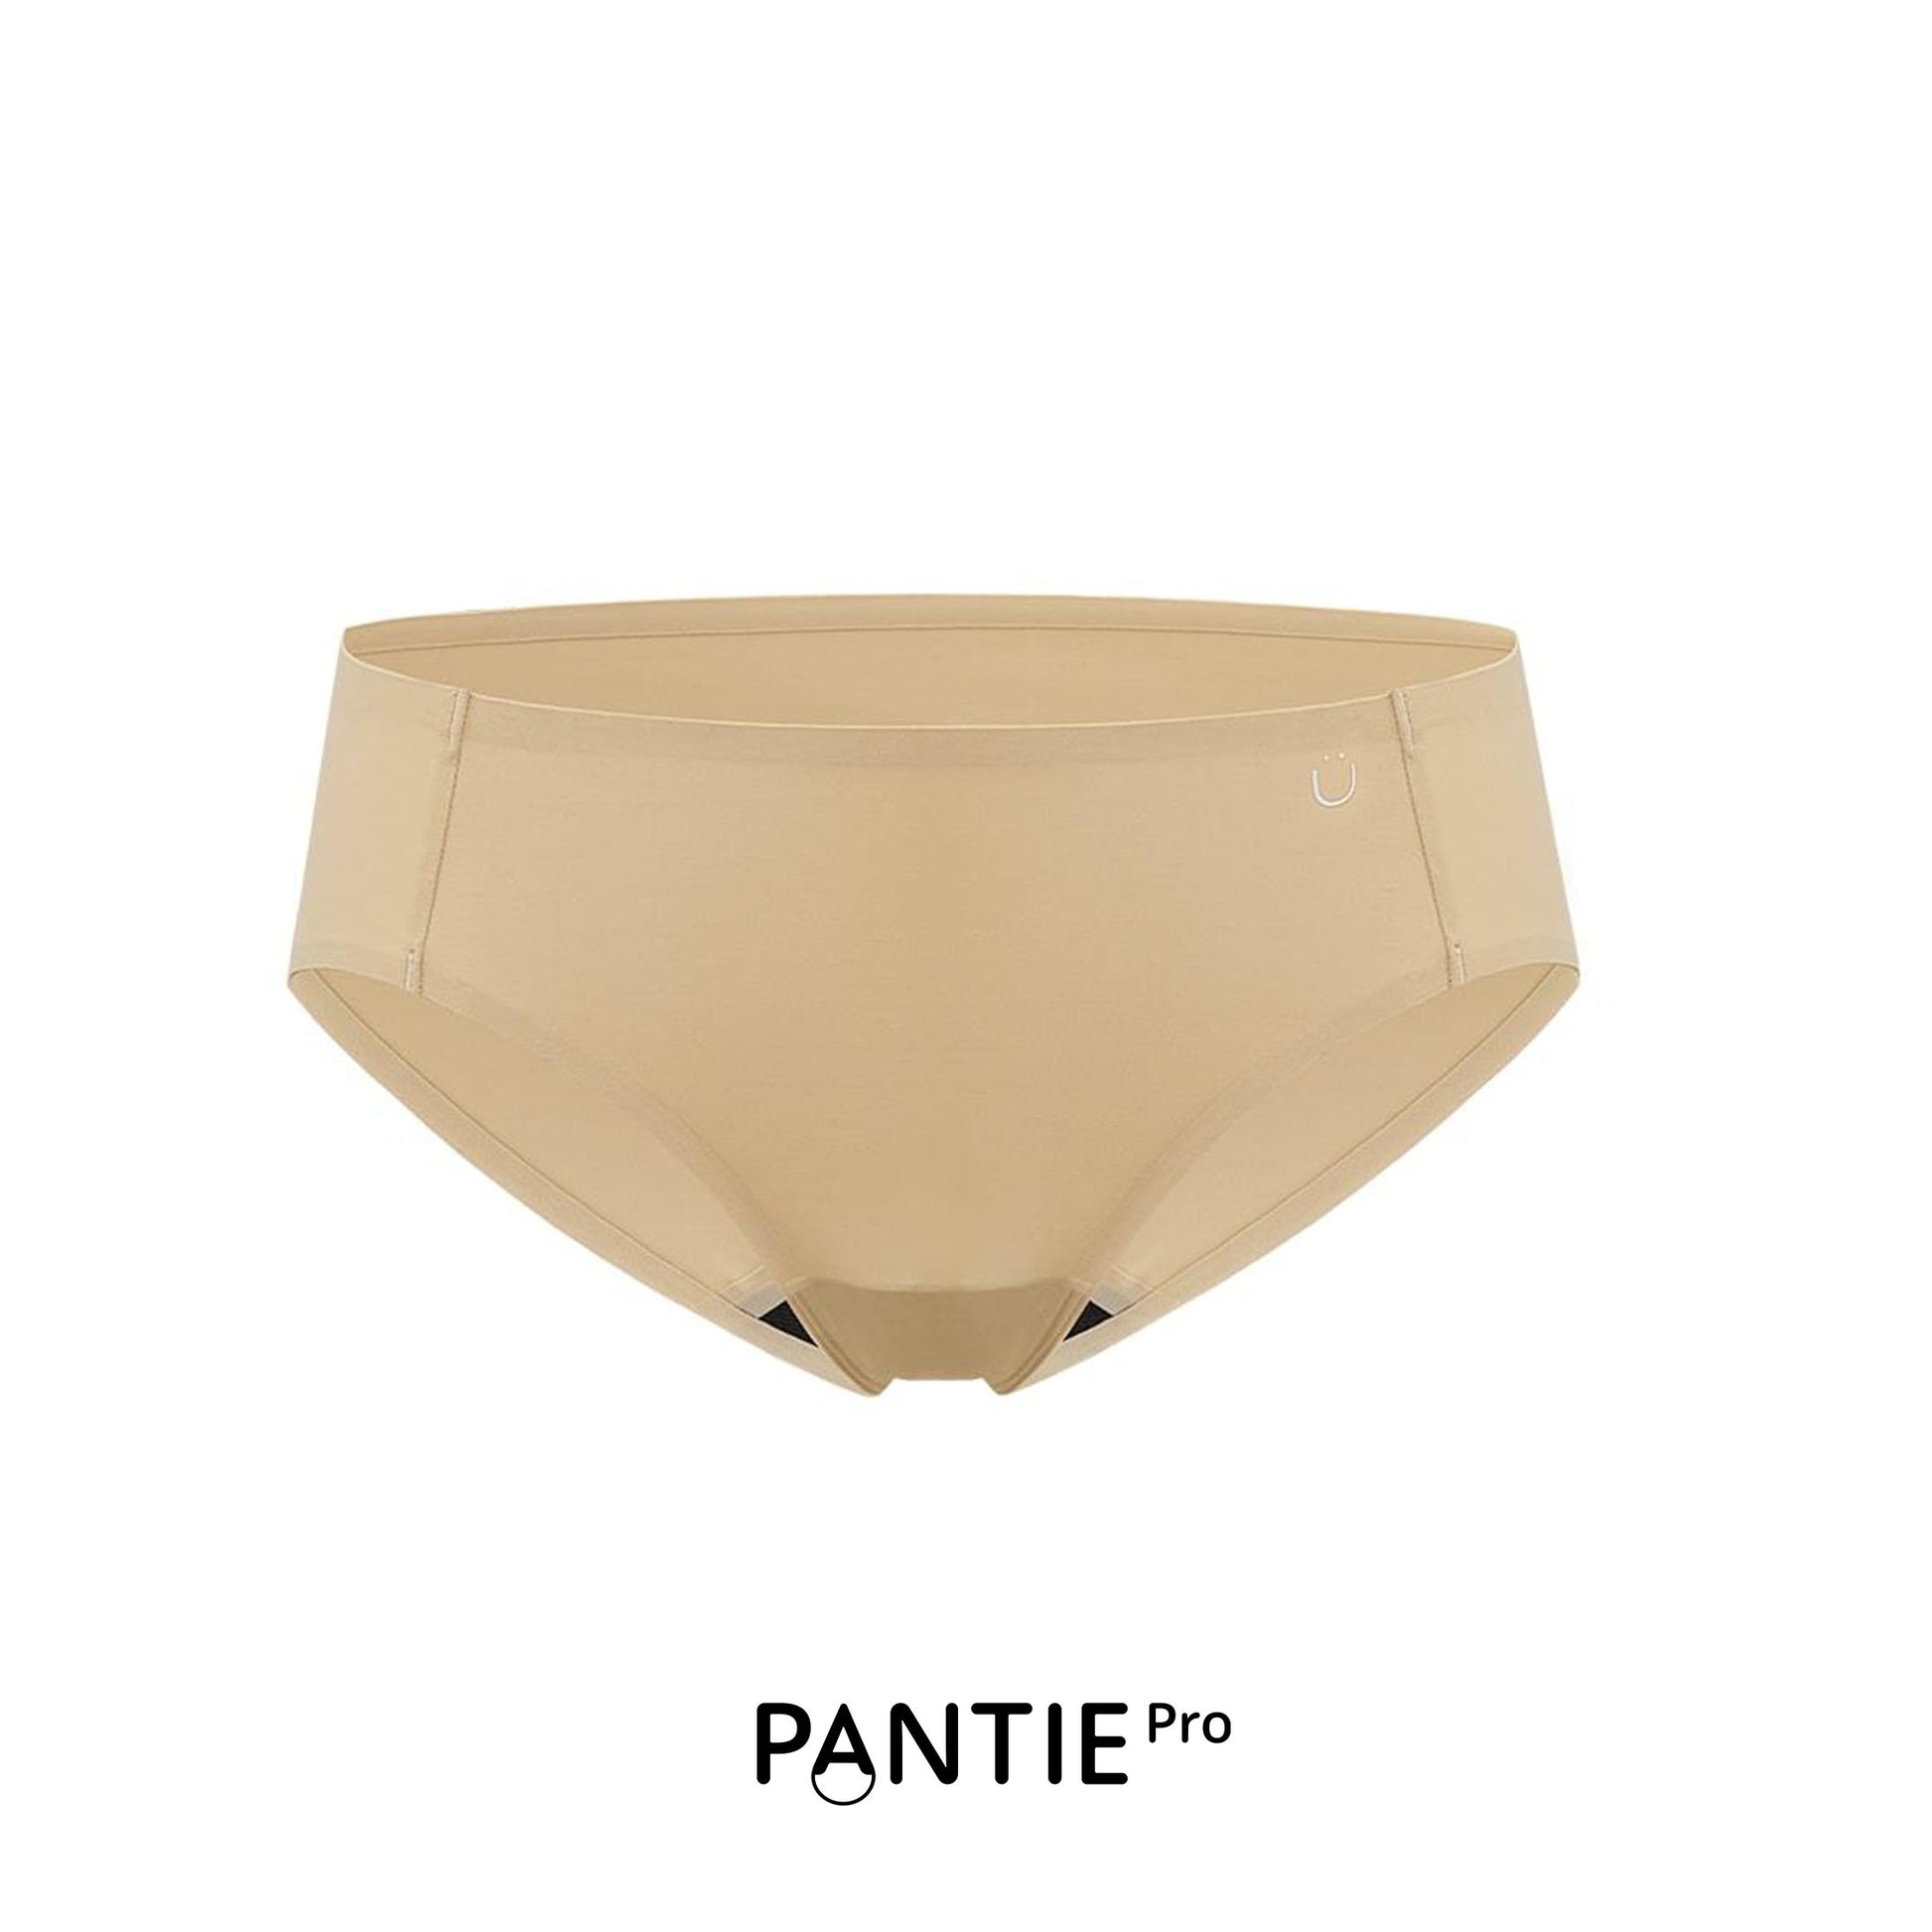 Alice period-proof panty